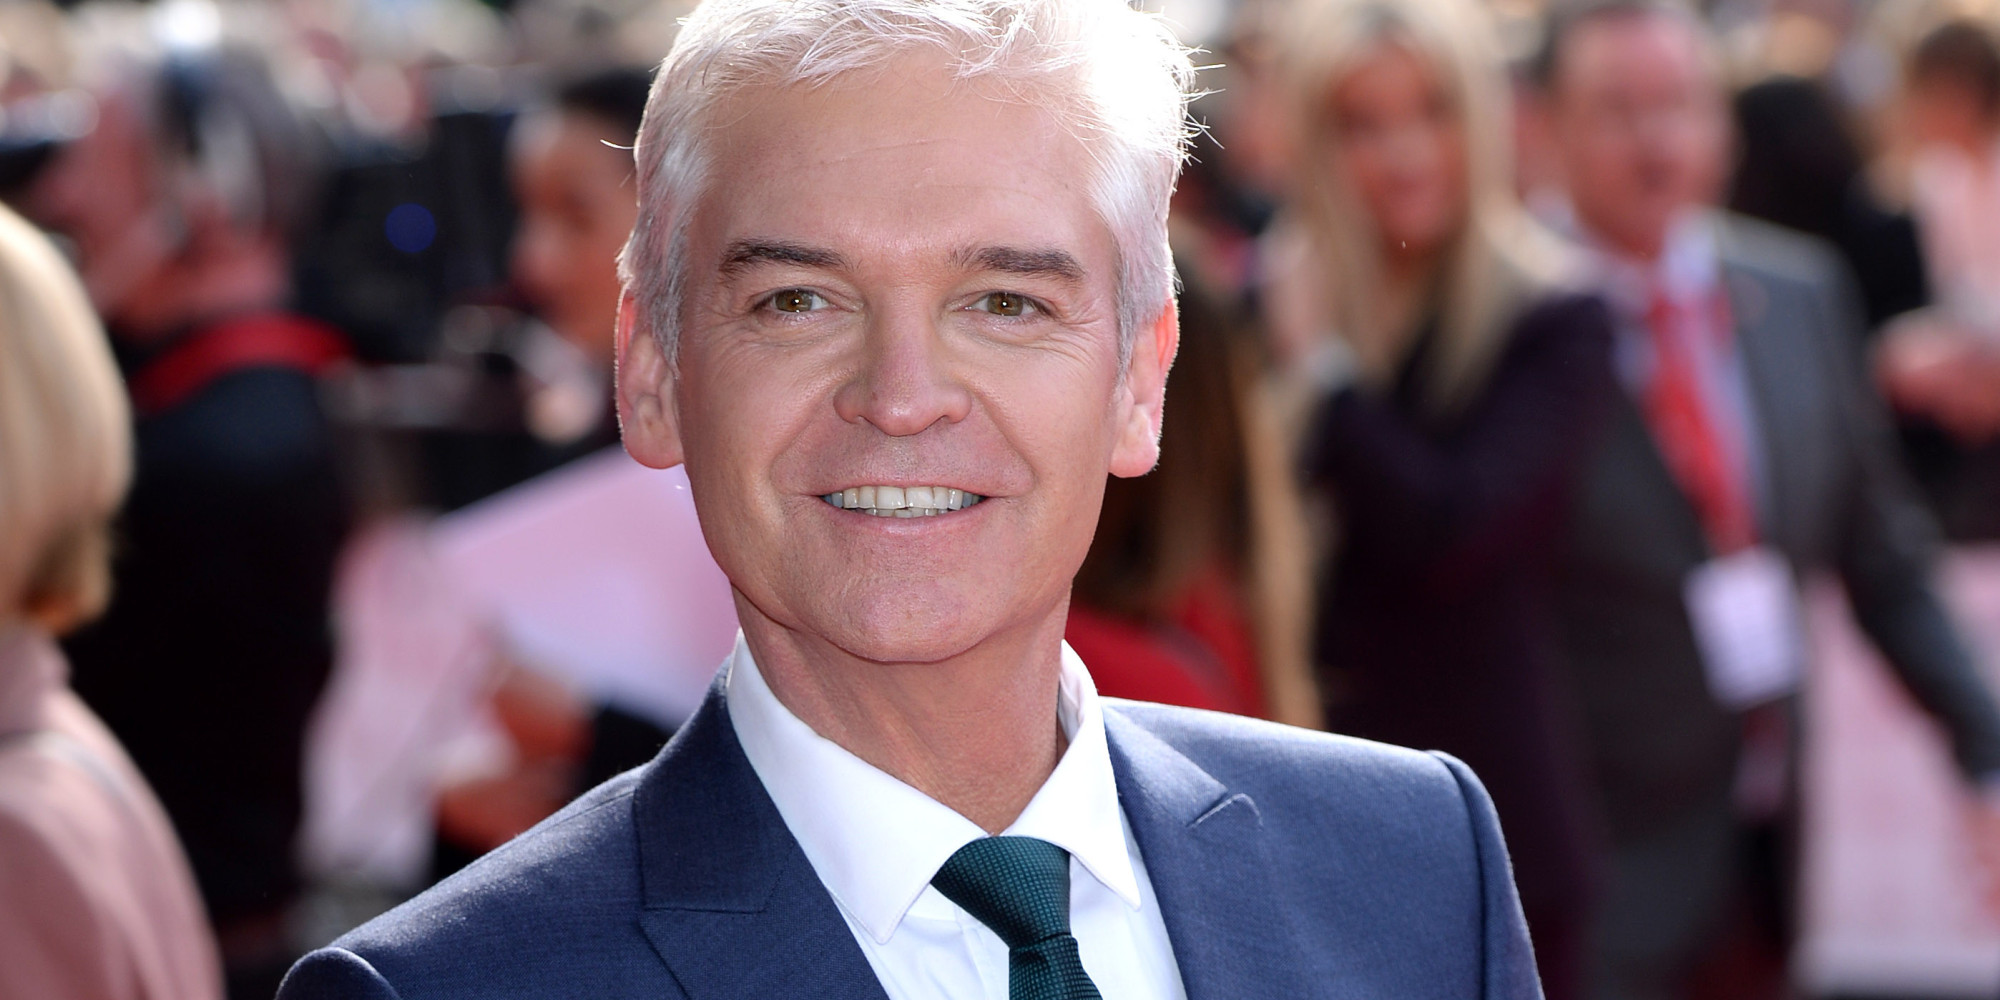 Phillip Schofield To Broadcast Live On ITV For 24 Hours For 'Text Santa'